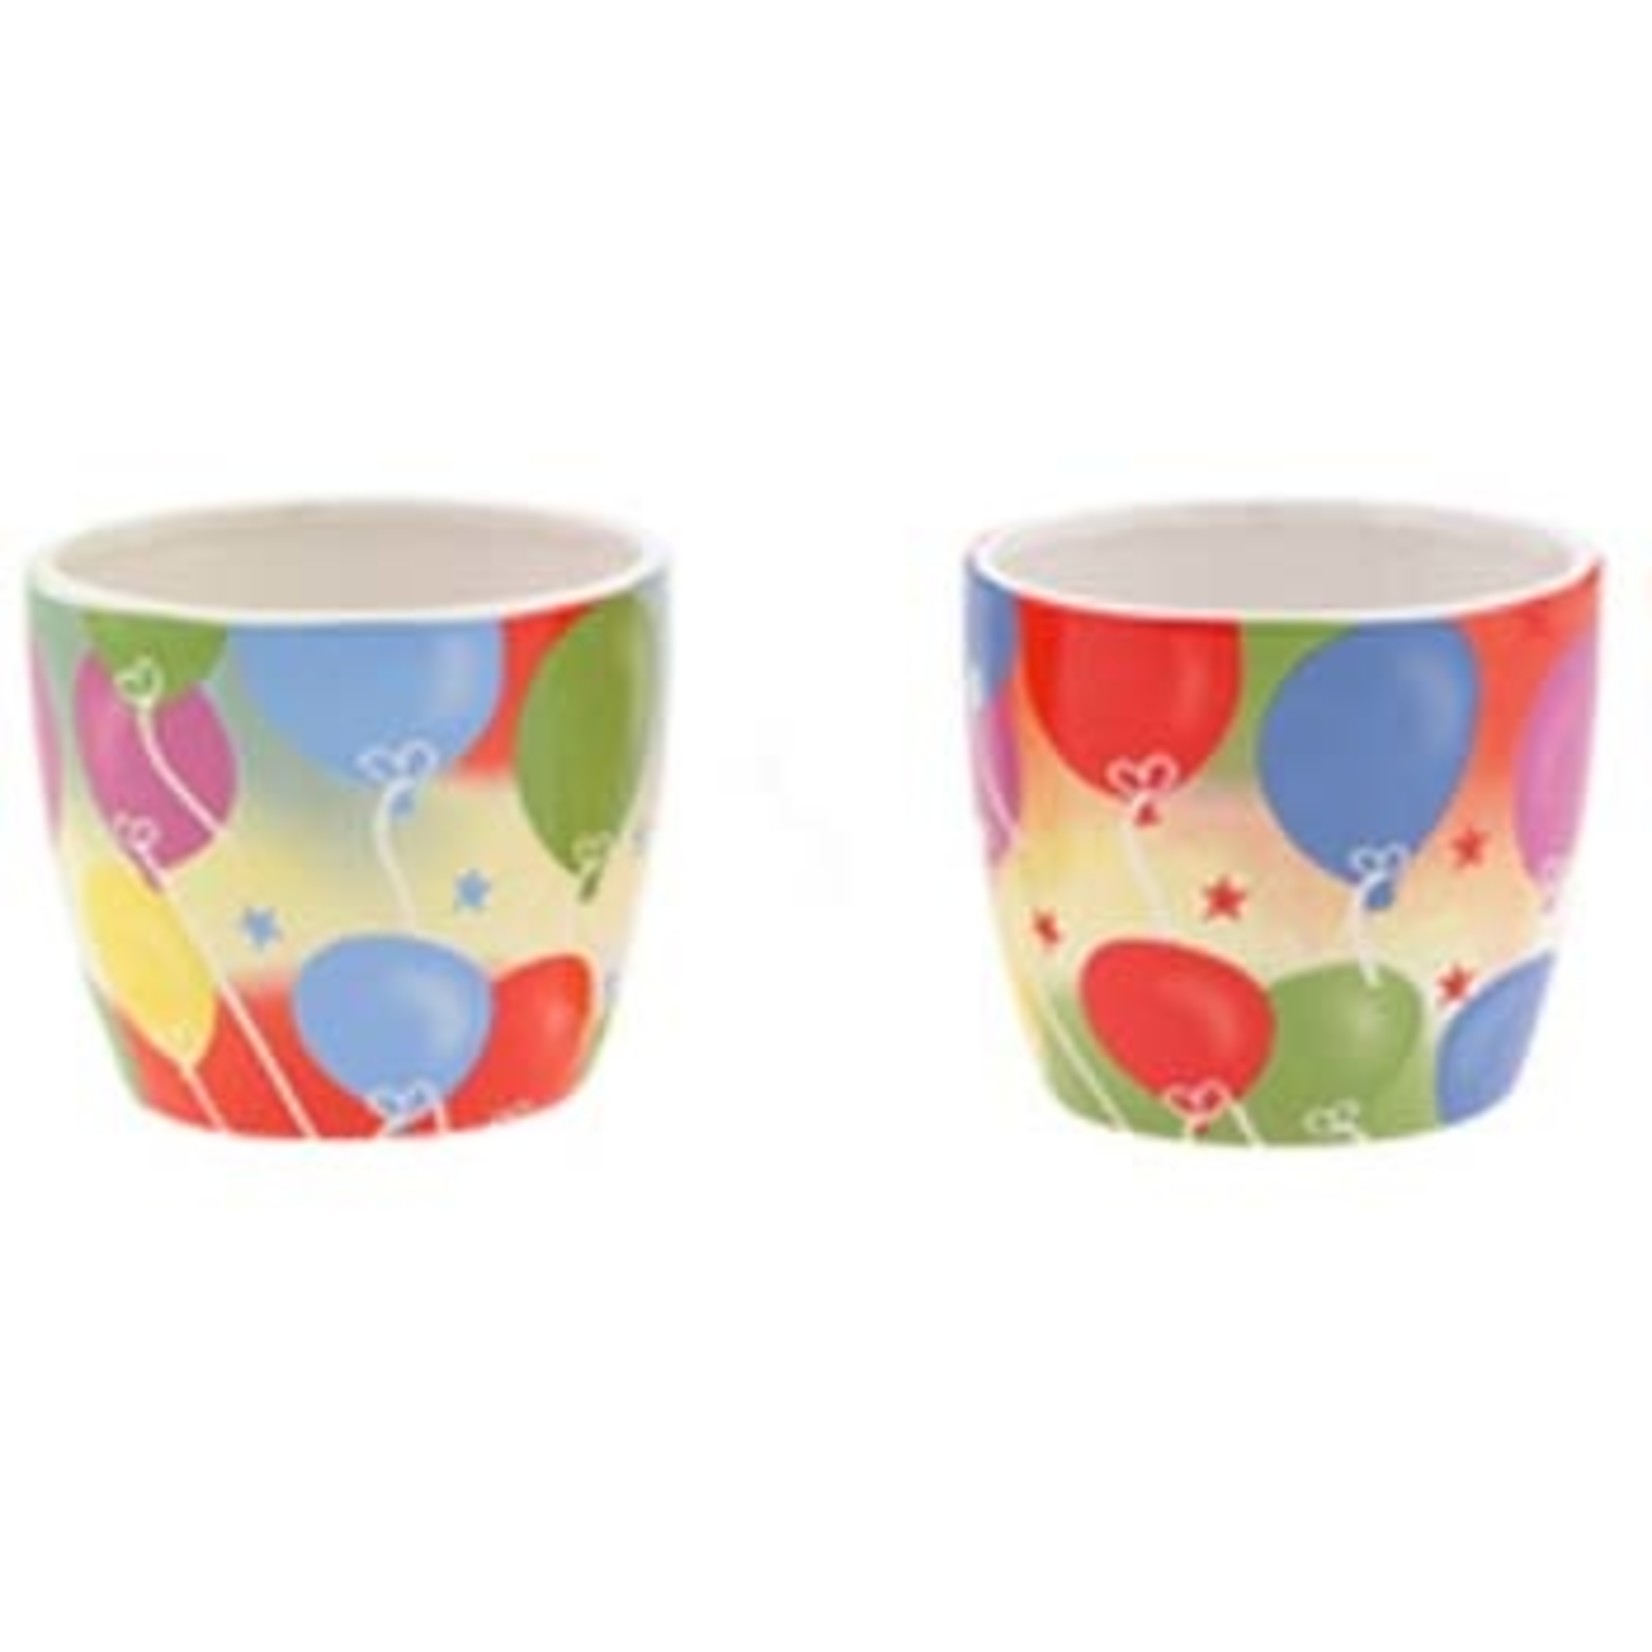 50% OFF WAS 4.99 NOW $2.50 4.5” x 4.5” BALLOON POT